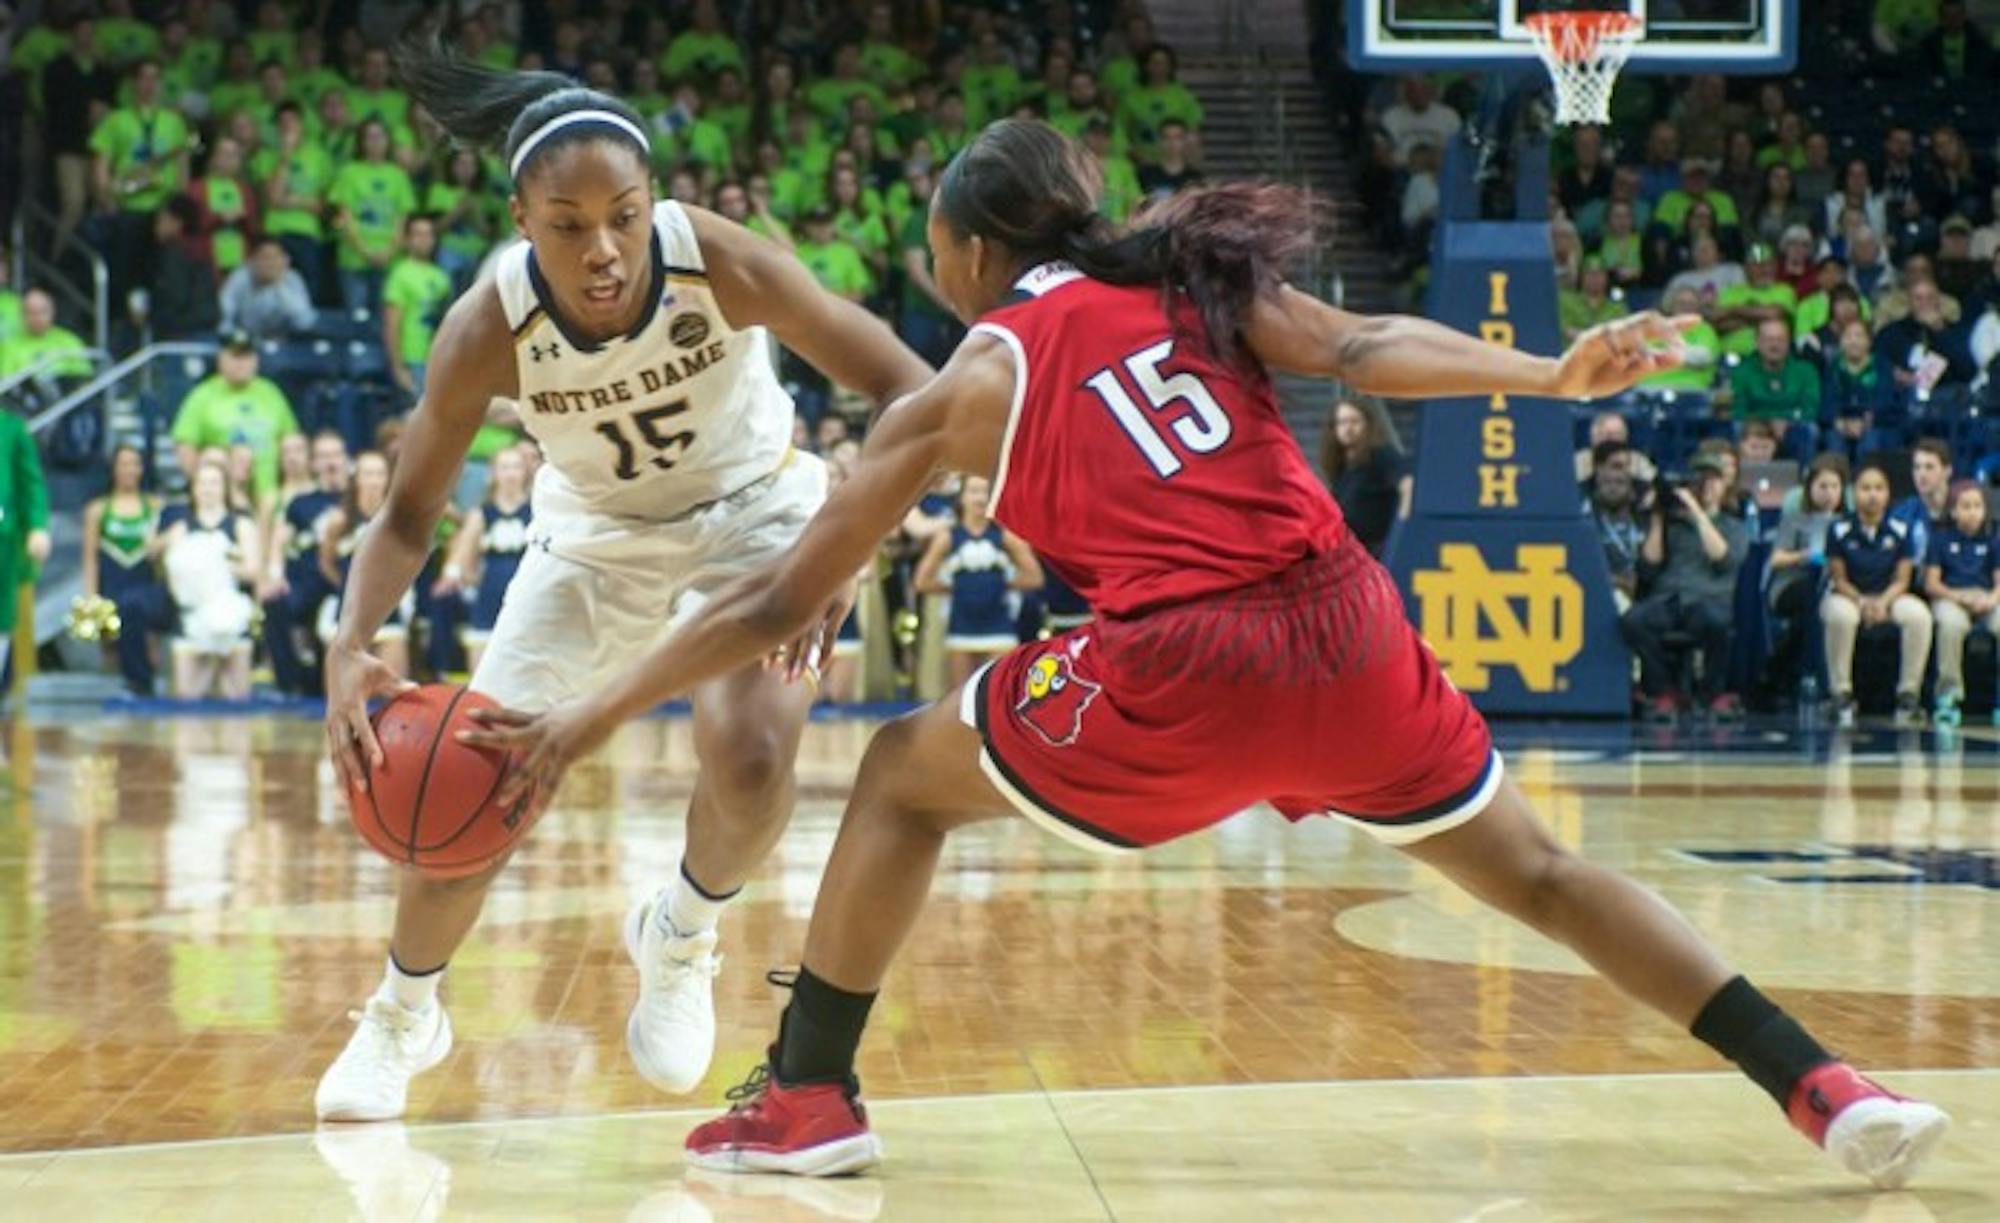 Irish senior guard Lindsay Allen drives past a Cardinal defender during Notre Dame’s 85-66 win over Louisville on Feb 6 at Purcell Pavilion. Allen finished with 15 points, a season-high, and 8 assists.